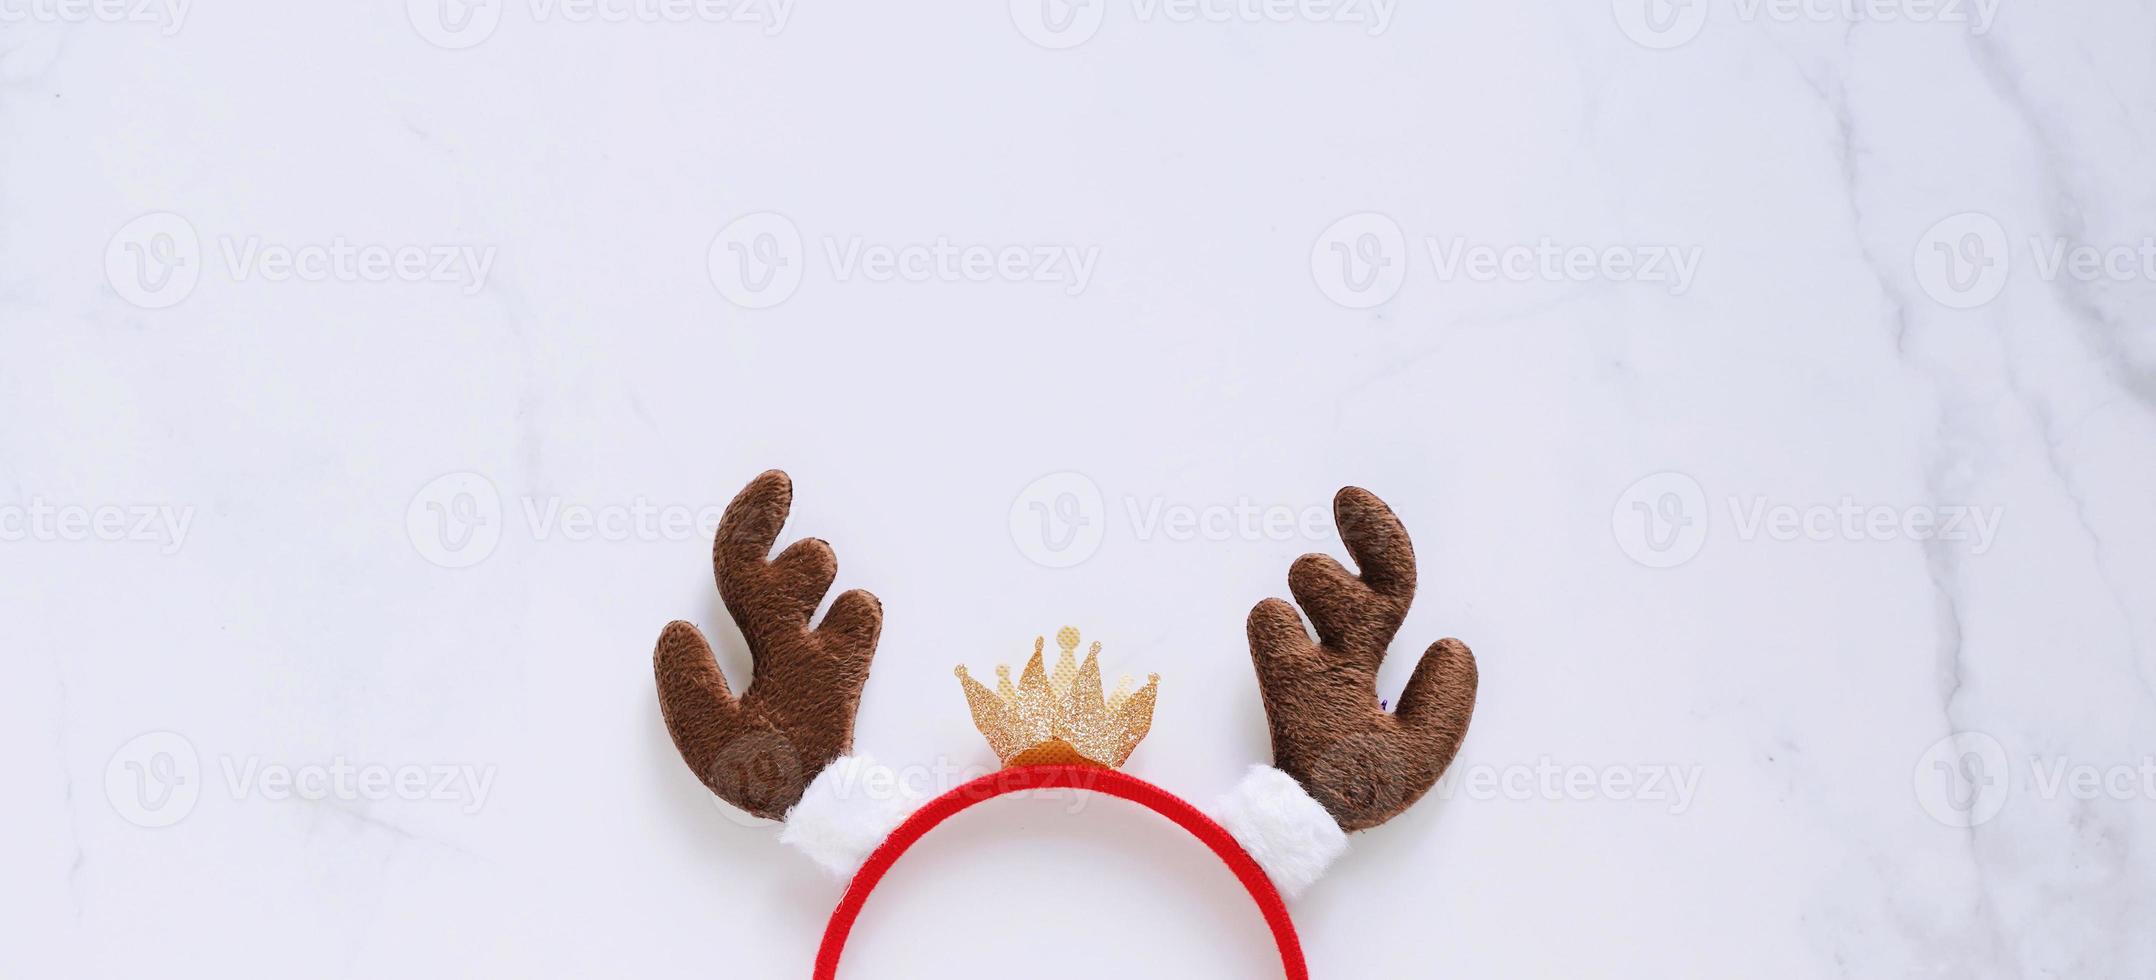 Fancy headband with reindeer antler decorative shape for christmas party and celebration on white marble background, banner style for text photo